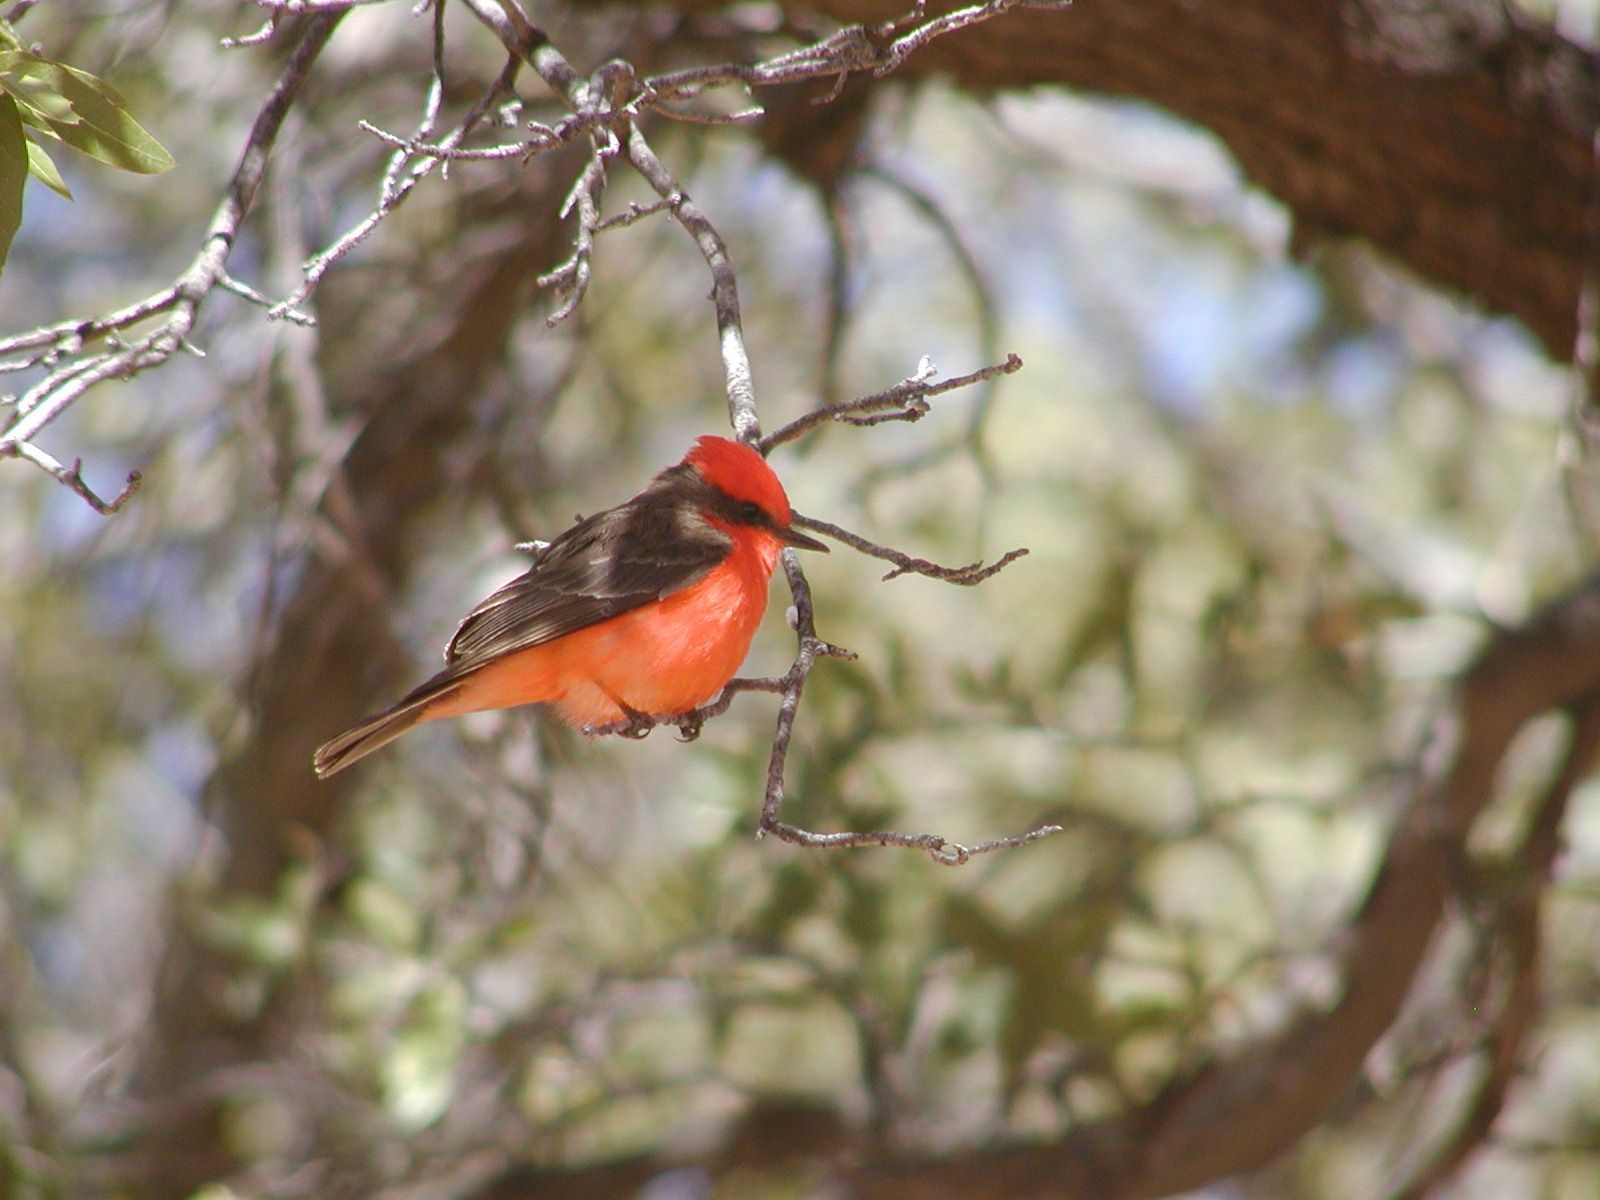 A great diversity of birds are found in and near Coronado National Memorial